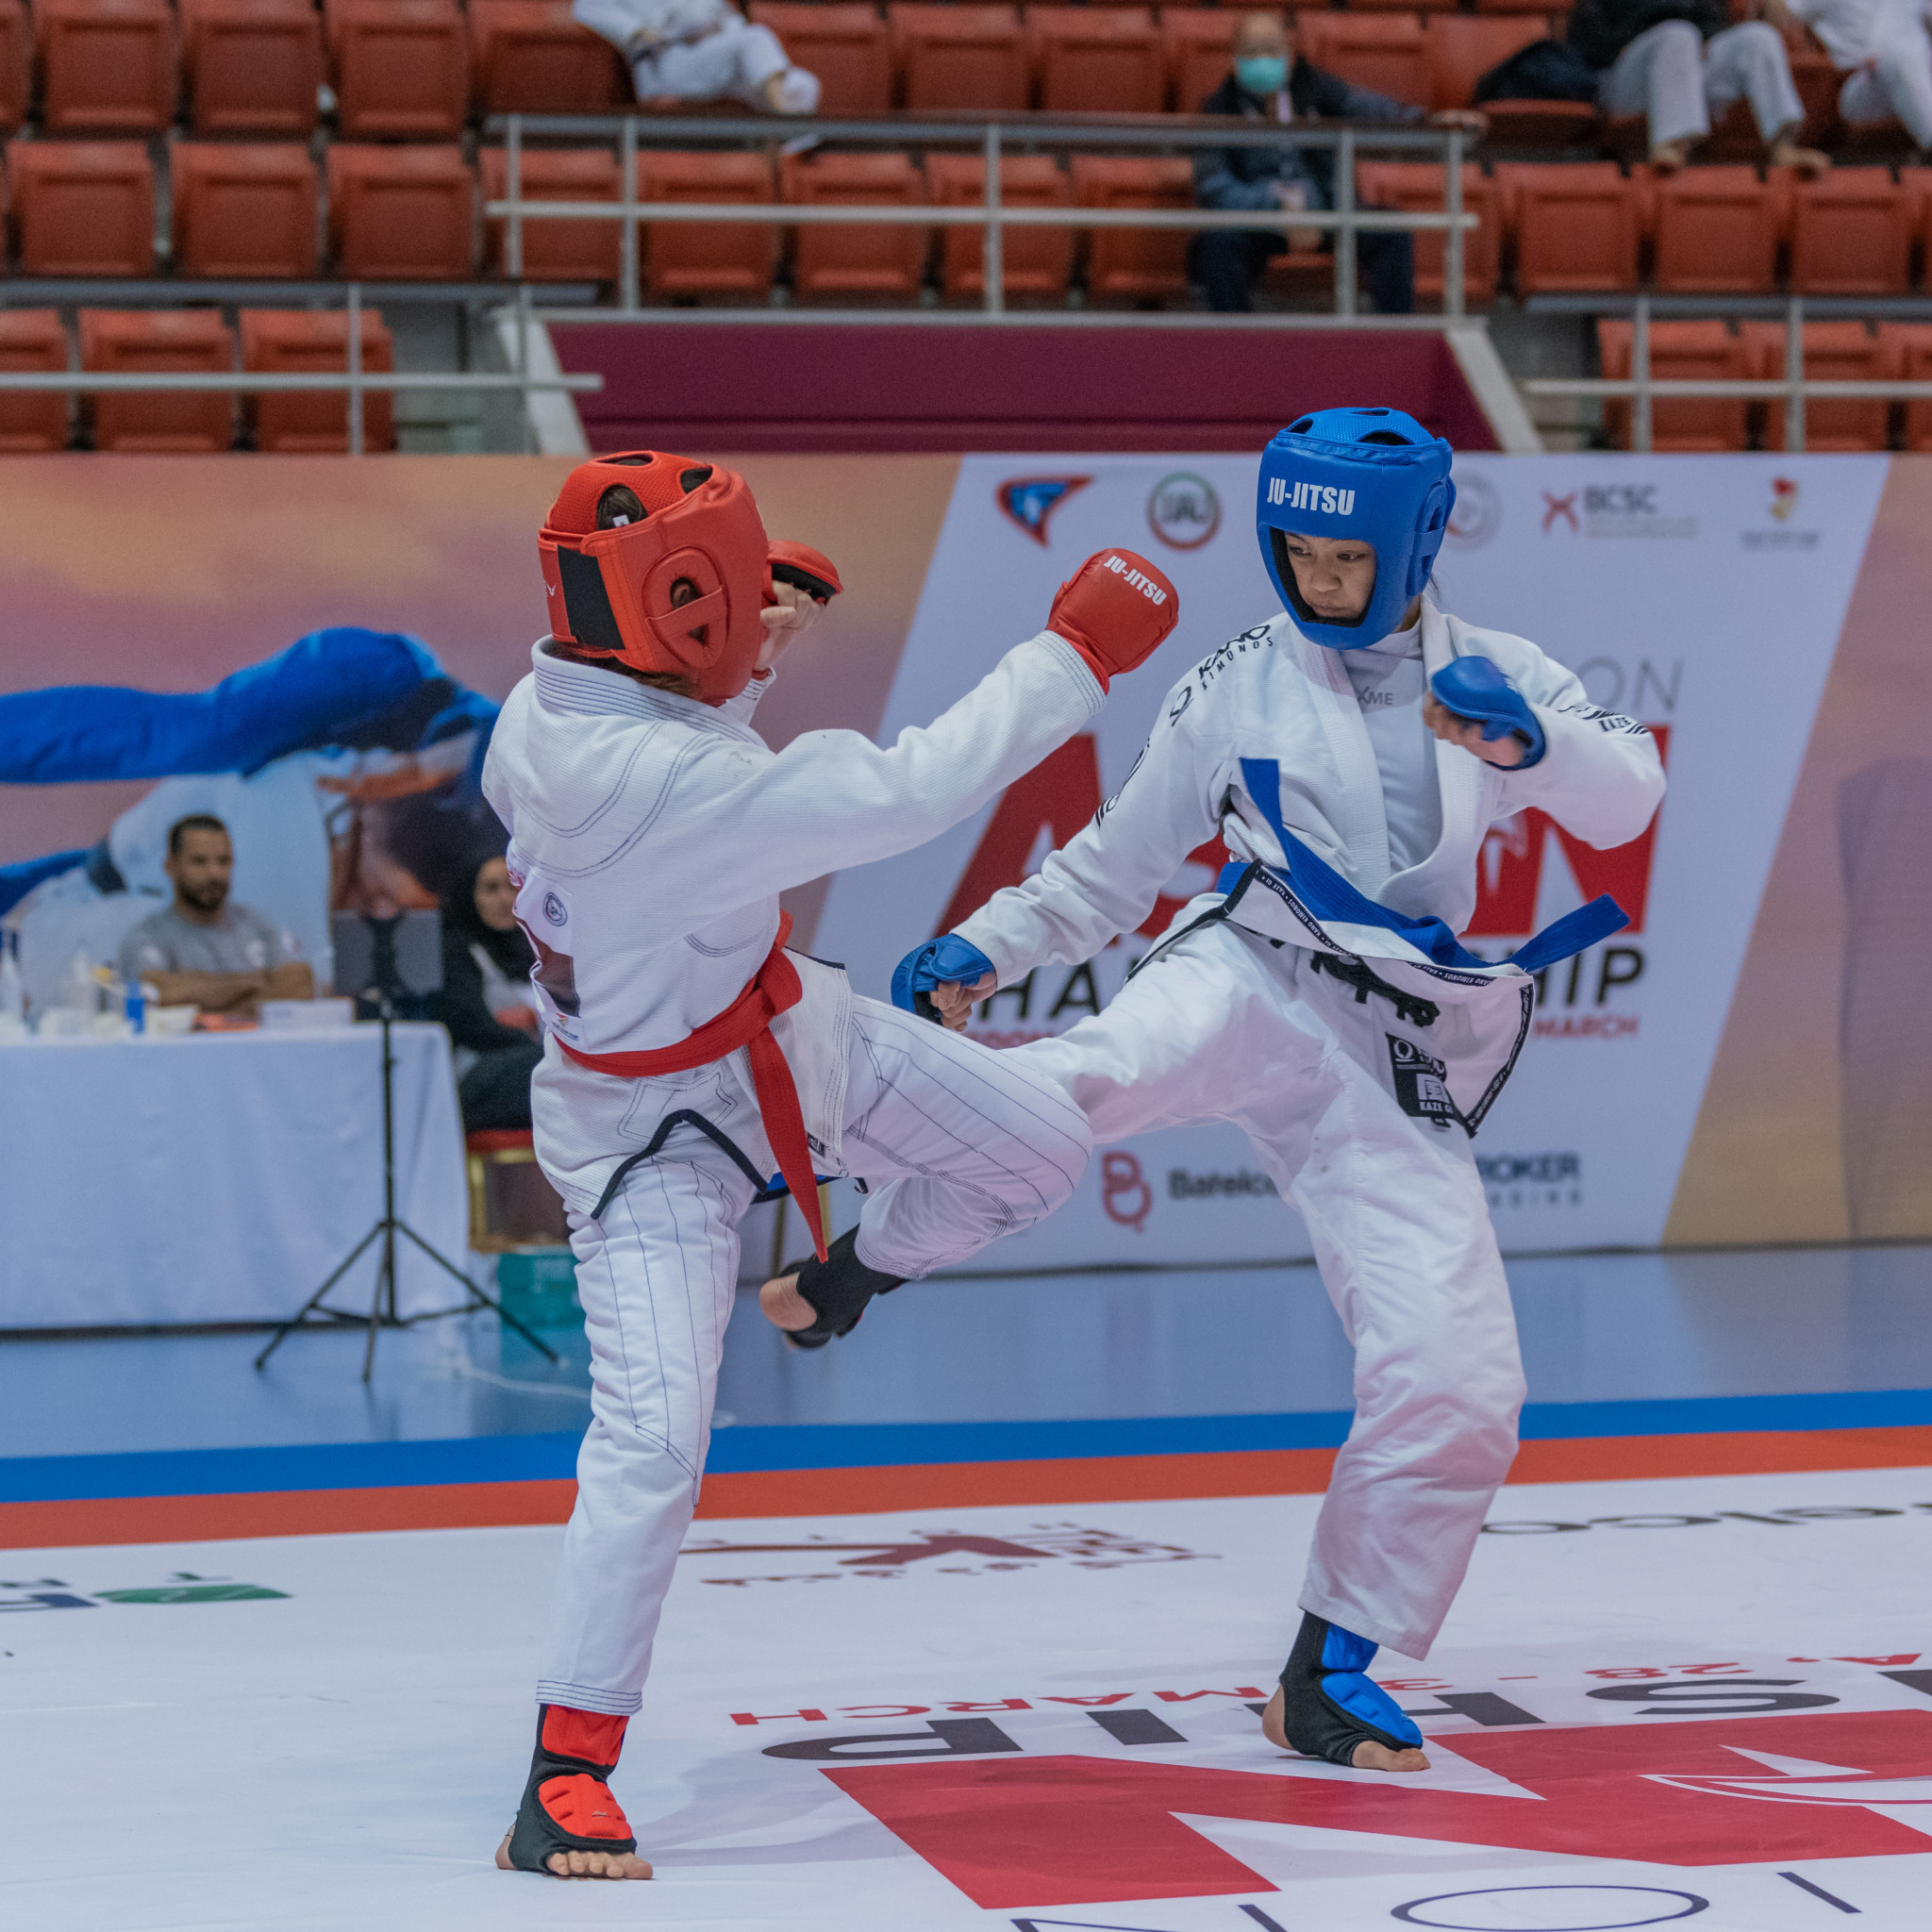 Ju-jitsu athletes have a number of major events to look forward to on the sport's calendar ©JJIF